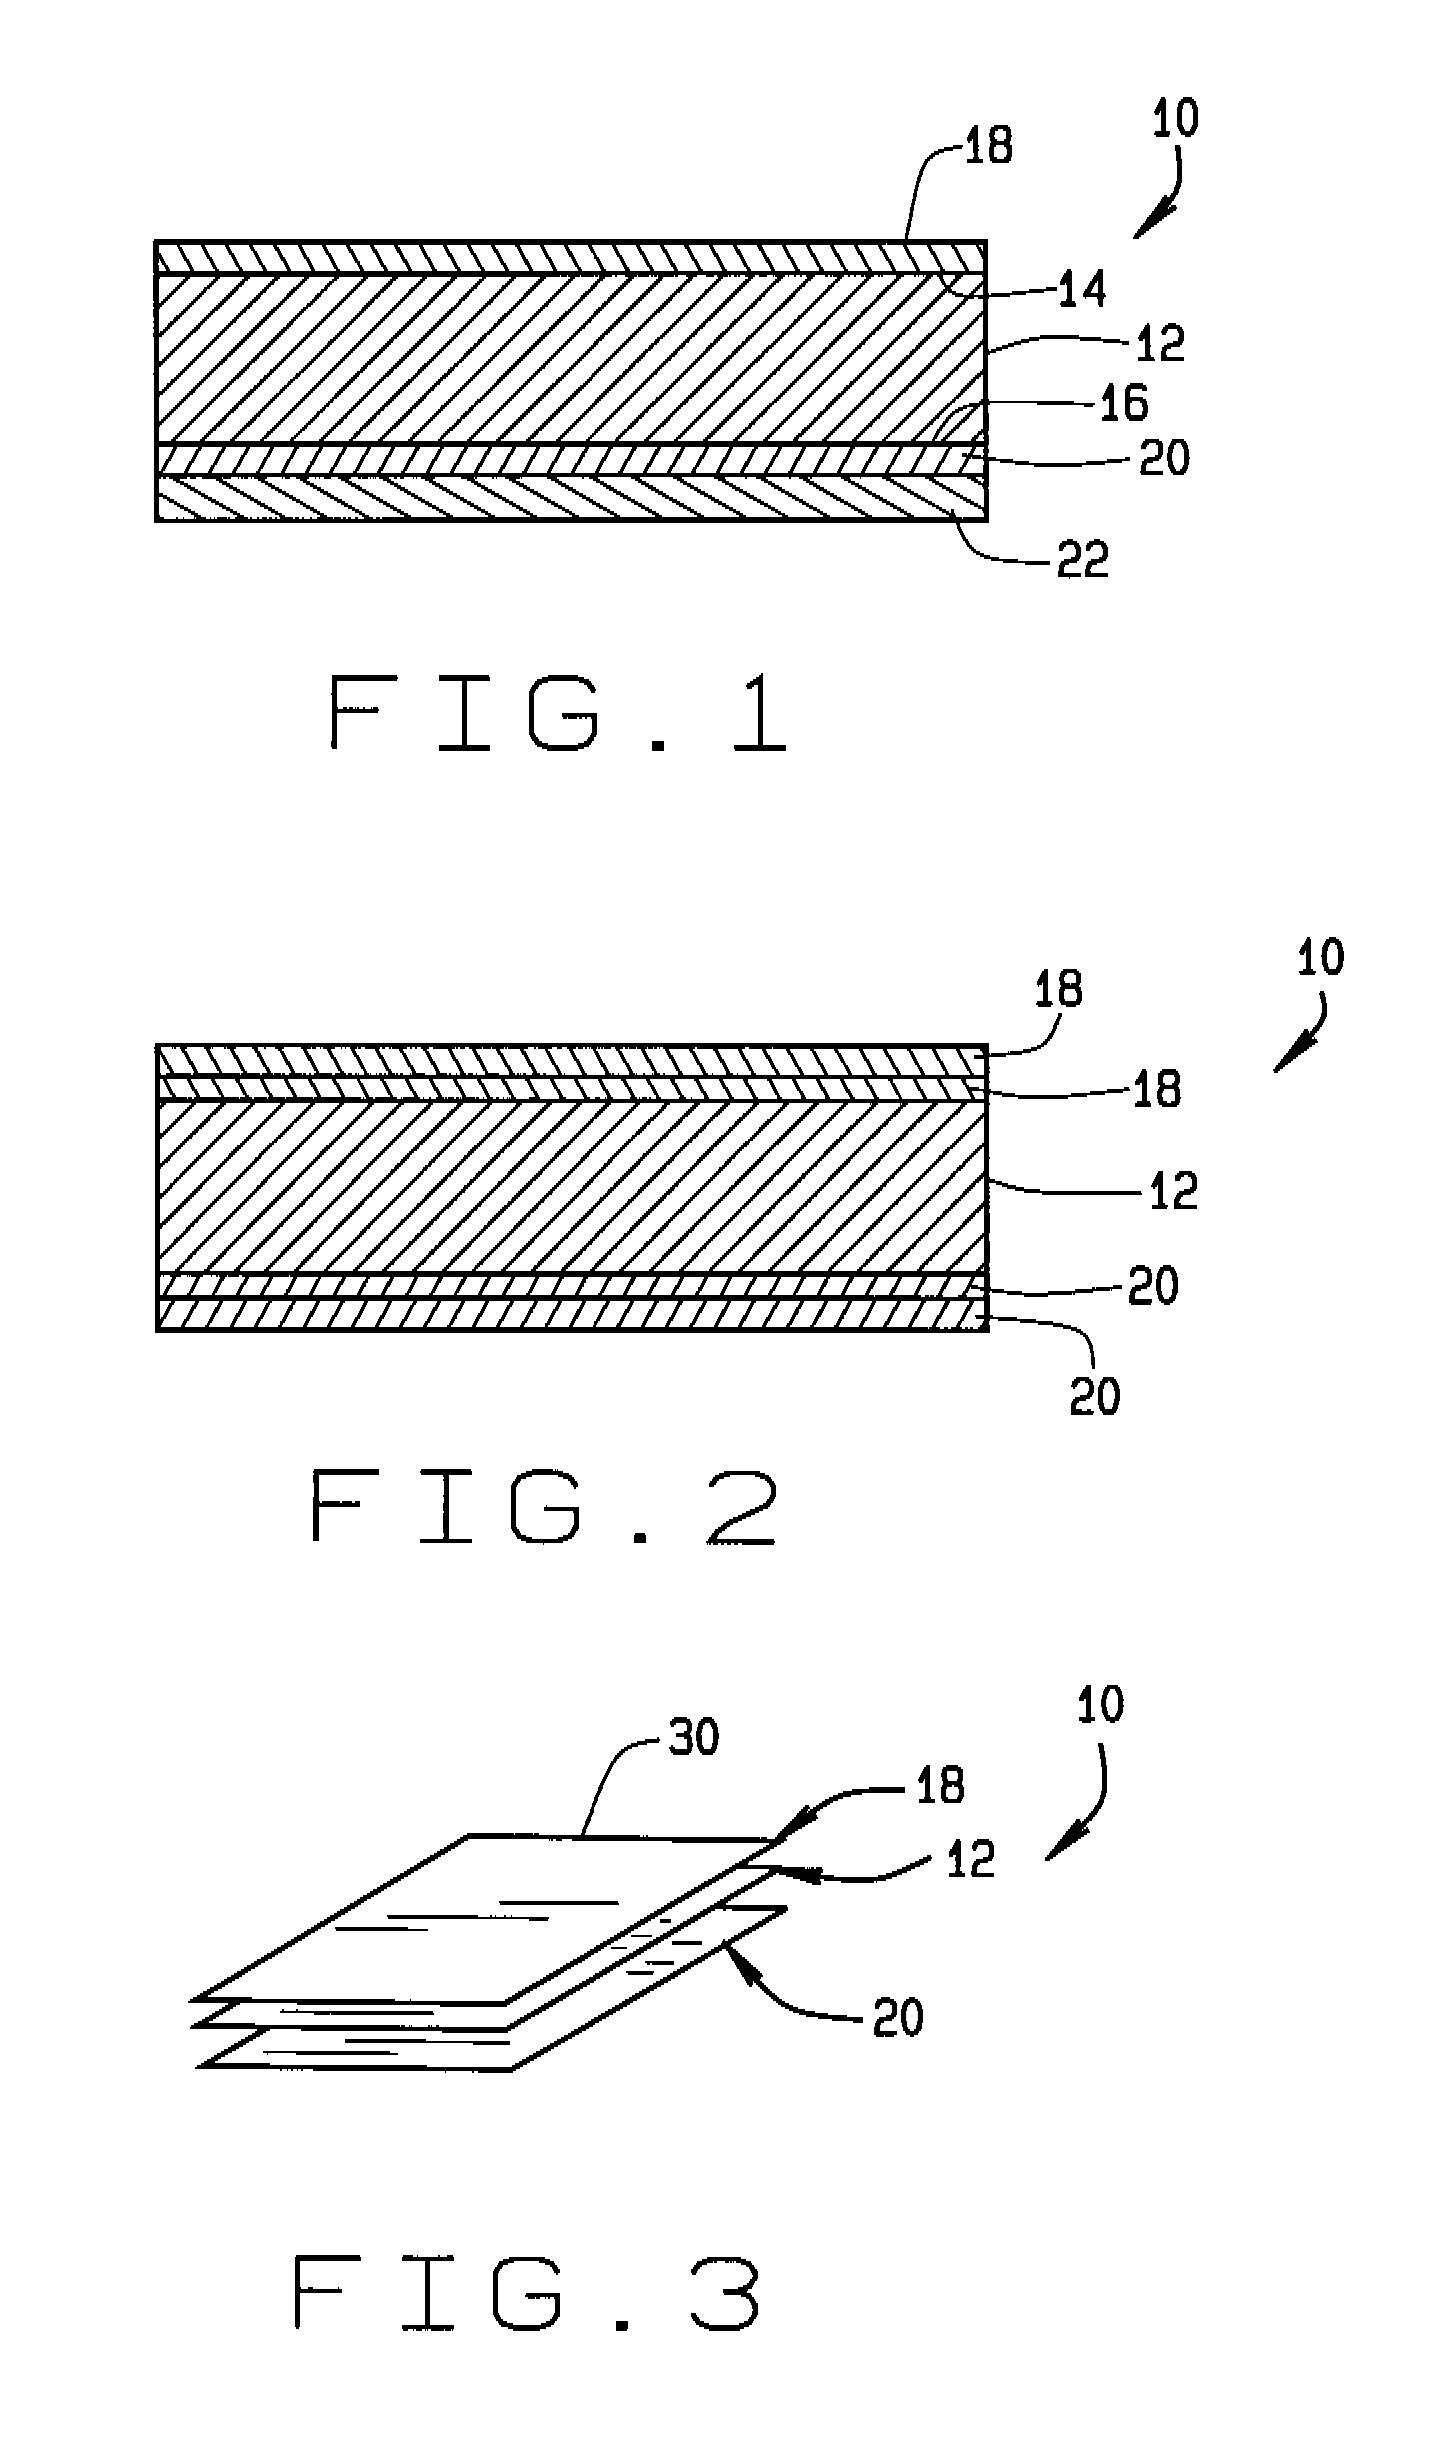 Lightweight composite thermoplastic sheets including reinforcing skins